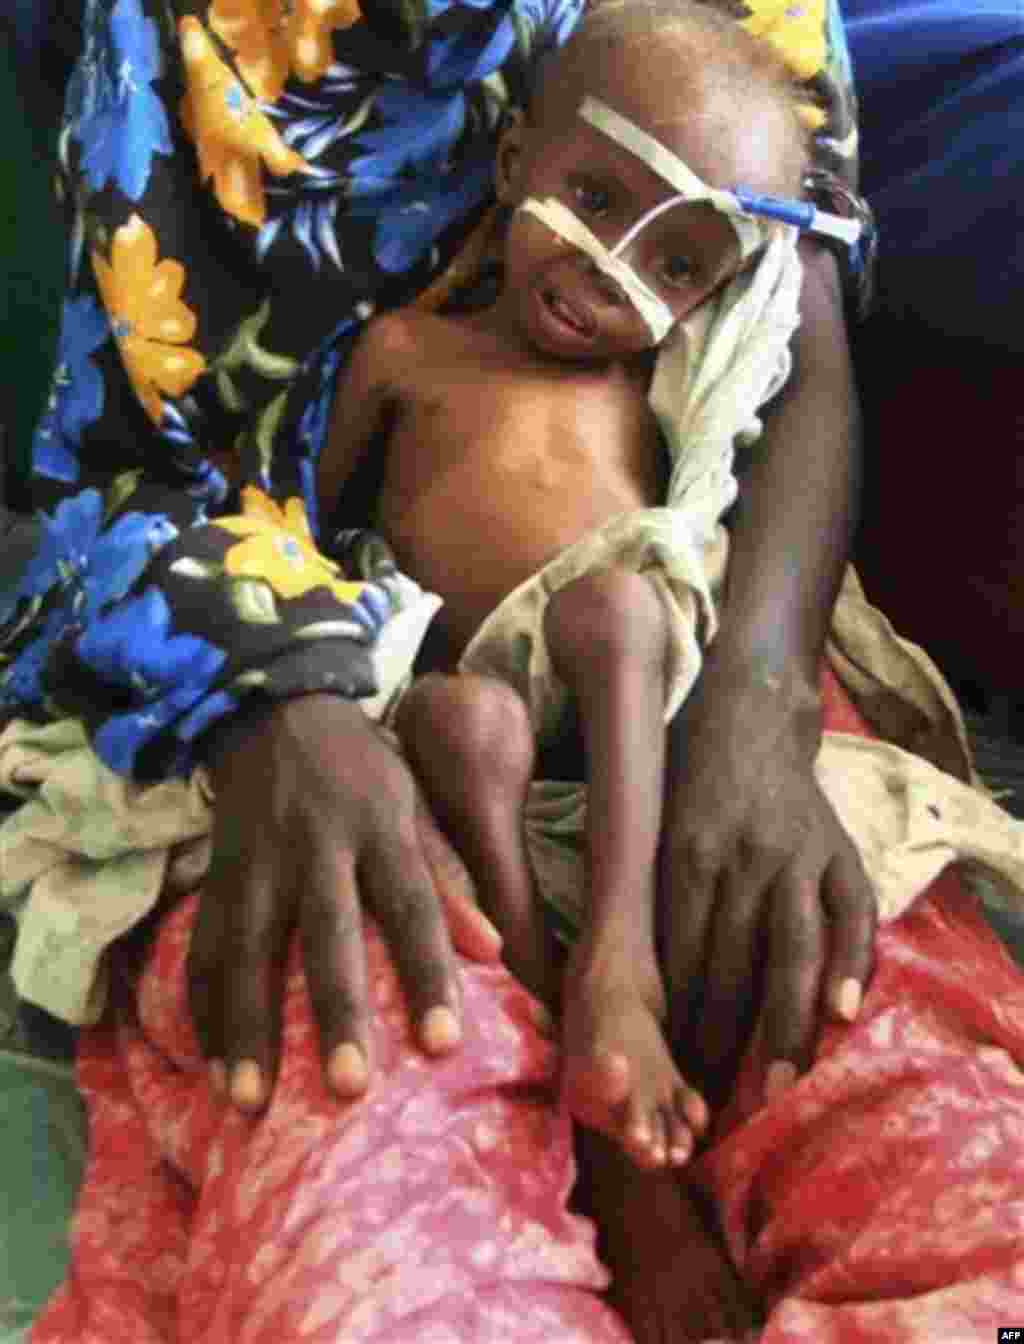 ARCHIV: Husein Momin, a 3-years-old malnourished child from southern Somalia sit on bed at Banadir hospital, Mogadishu, Somalia, after fleeing from southern Somalia (Foto vom 26.07.11) The U.N. will airlift emergency rations this week to parts of drought-